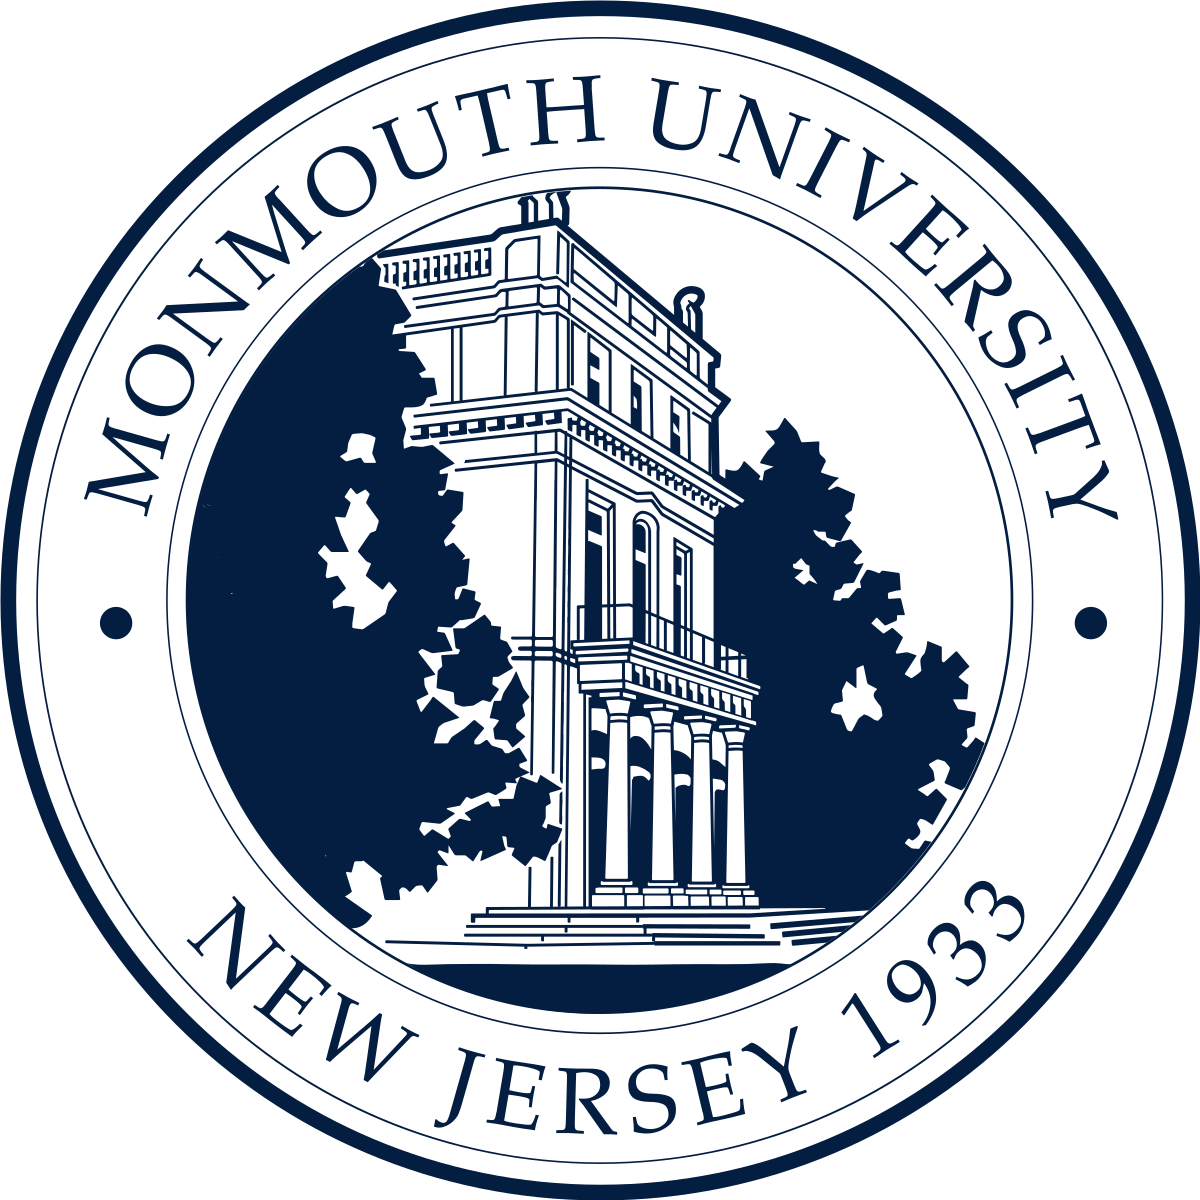 Monmouth_University_seal.svg.png